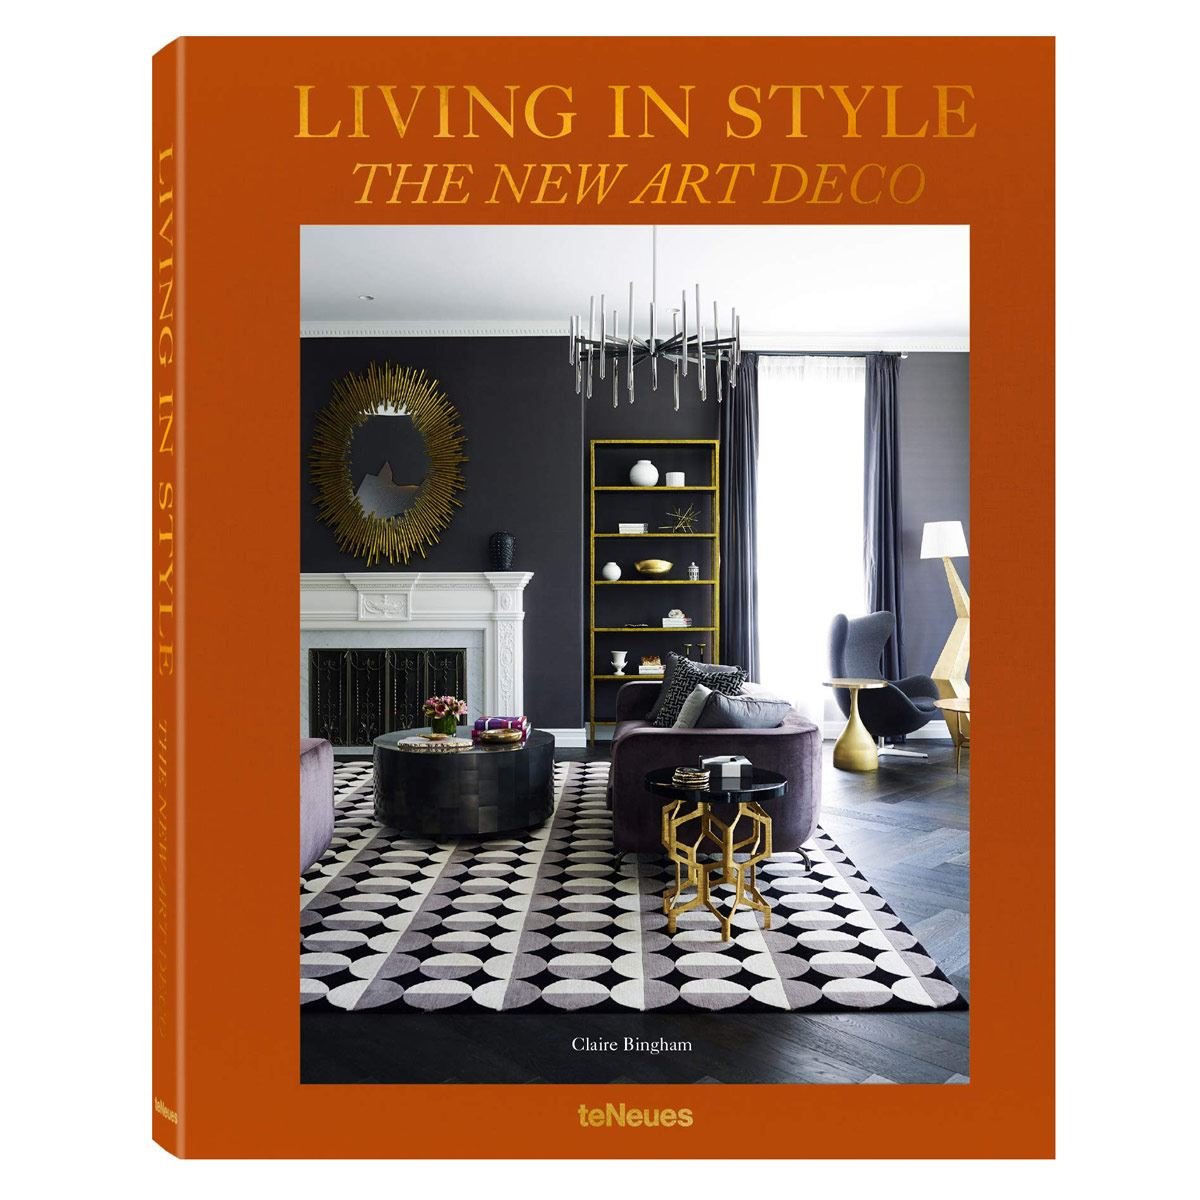 Living in Style: The New Art Deco